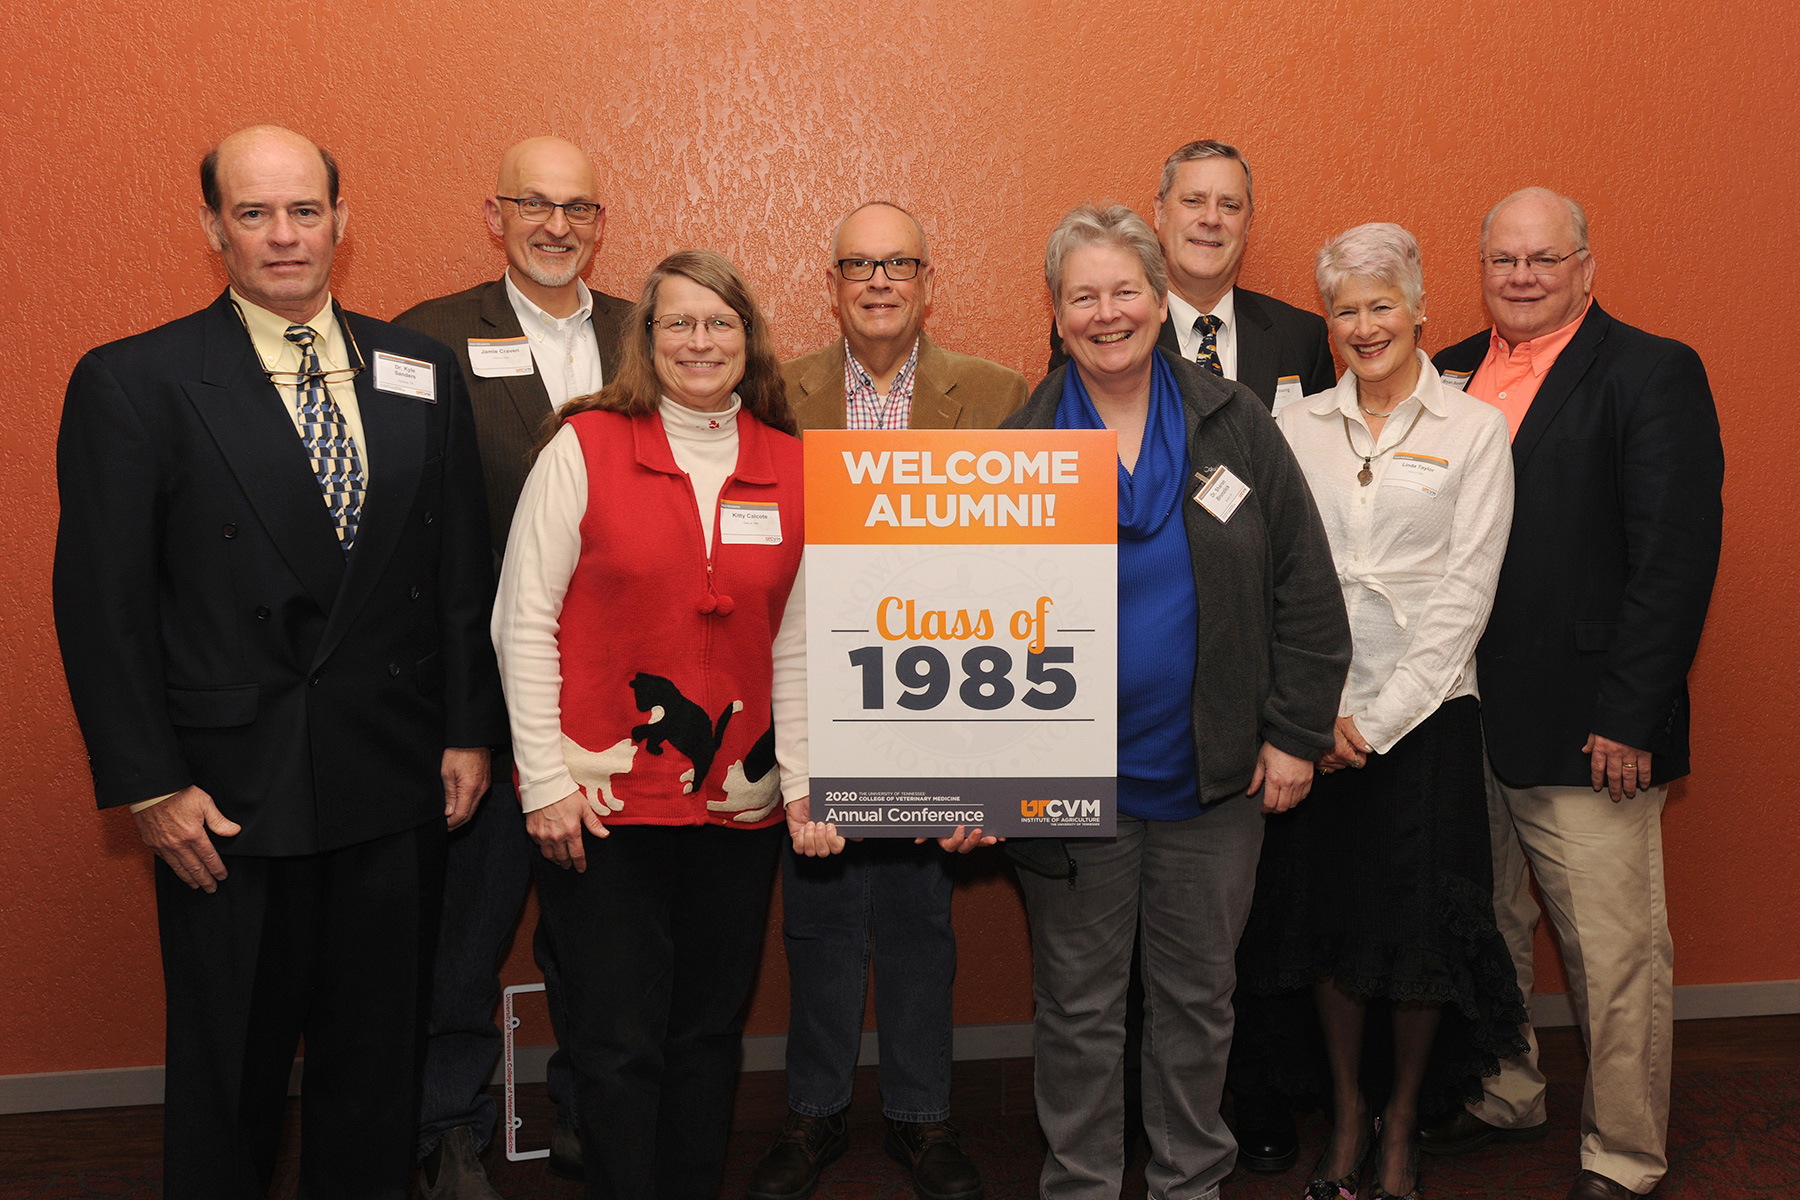 A group of eight alumni from the UT CVM class of 1985